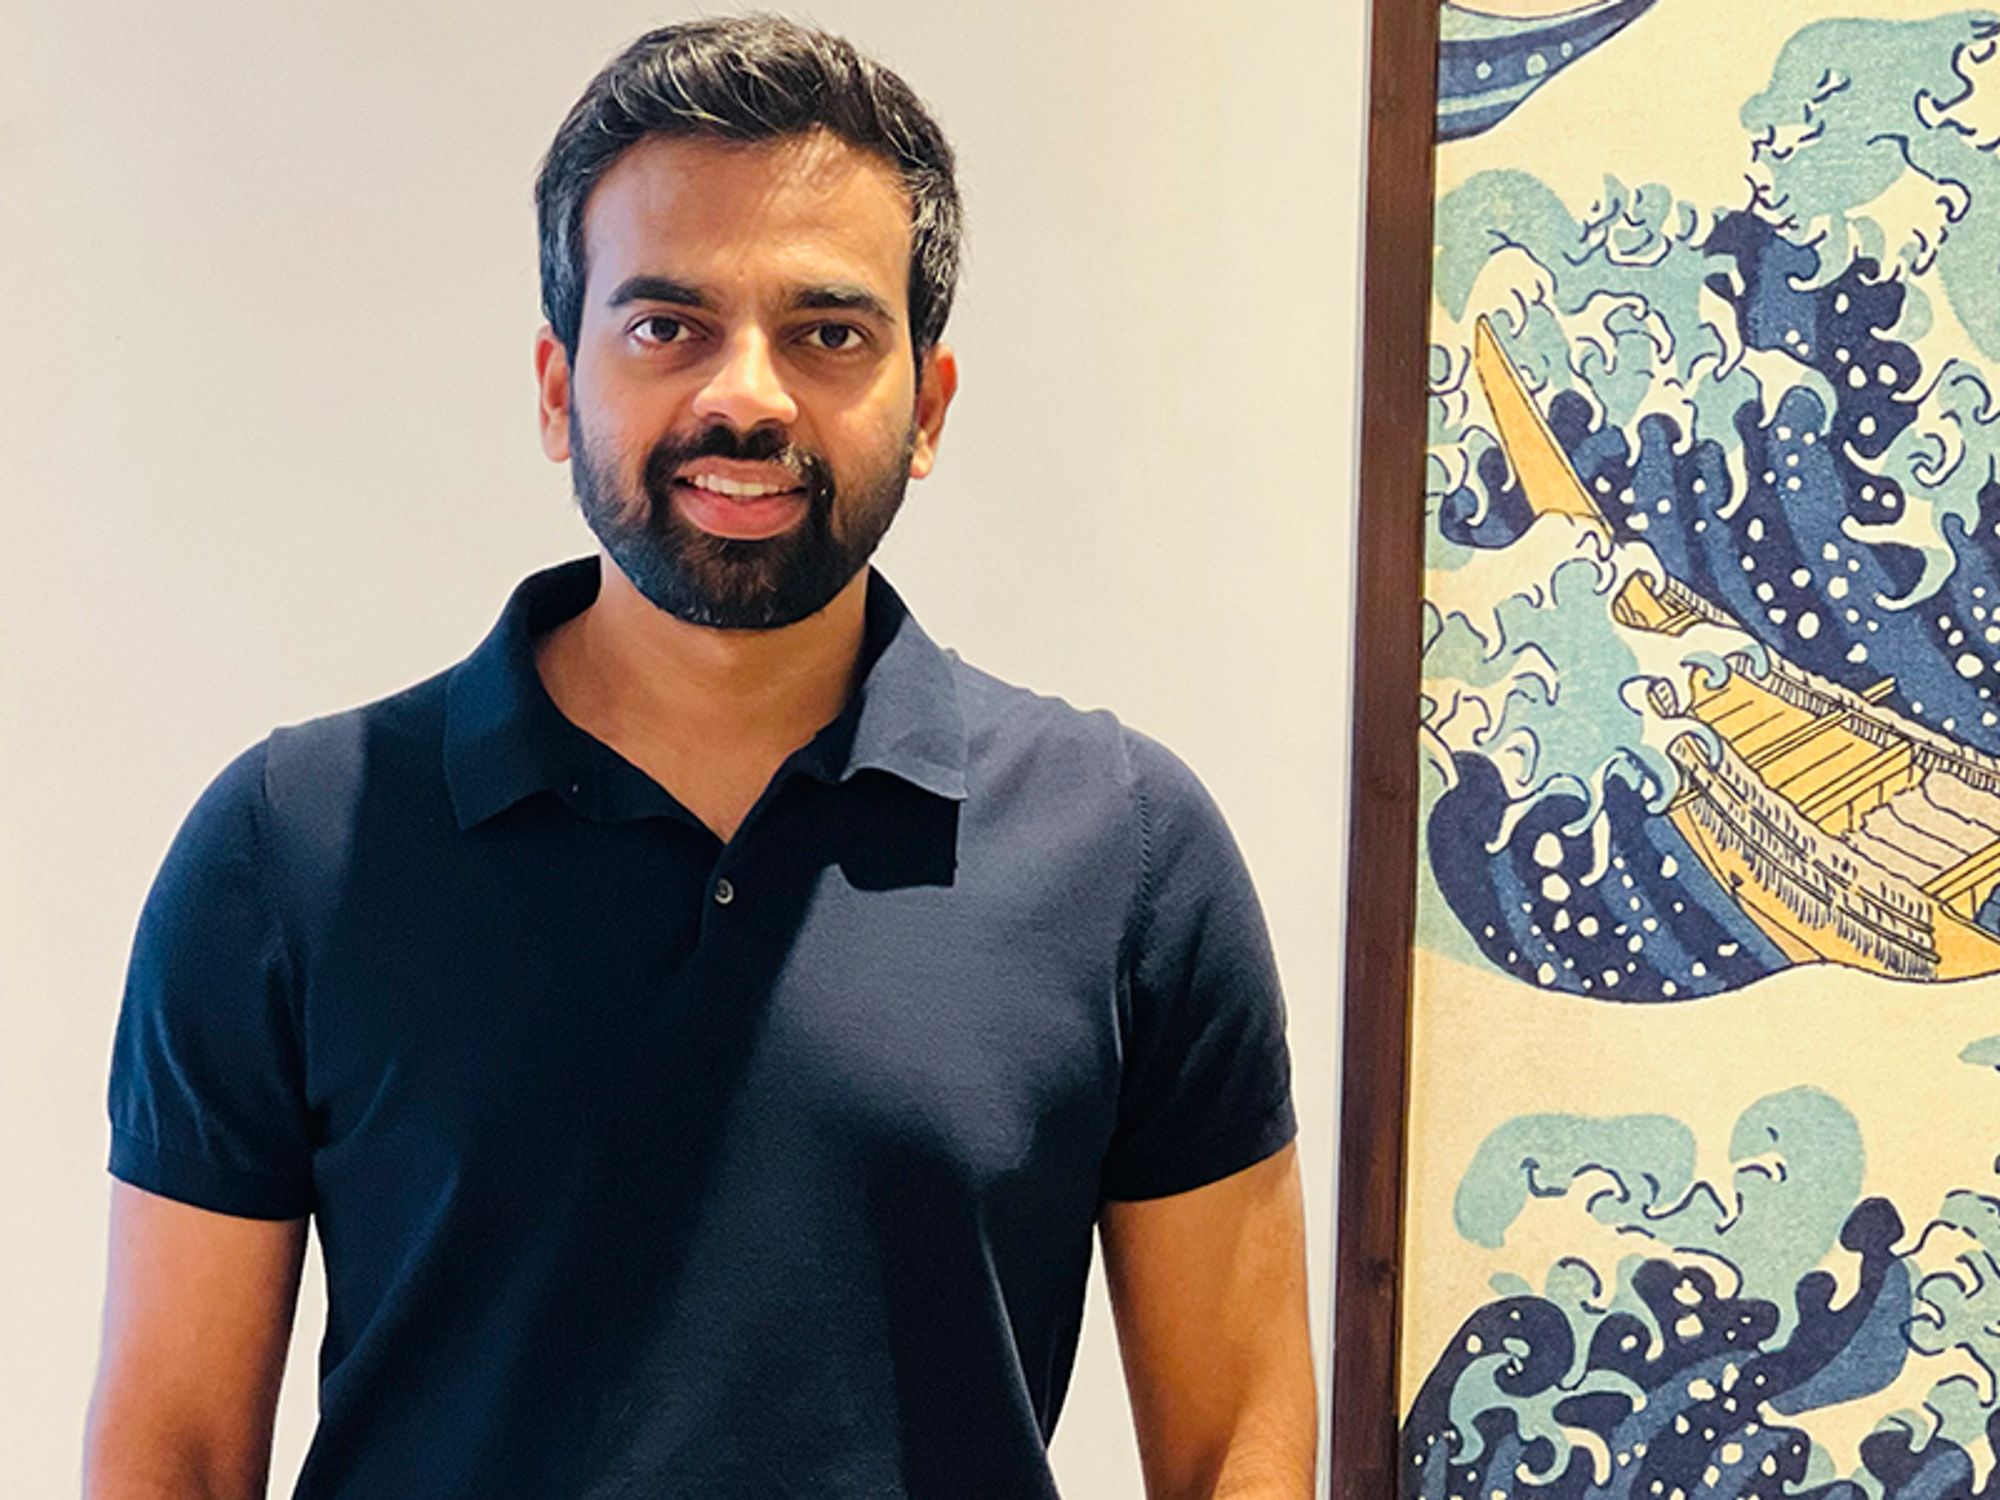 It'll Take Two To Three Years Before Significant Crypto Regulations Come Through: WazirX's Nischal Shetty - Forbes India